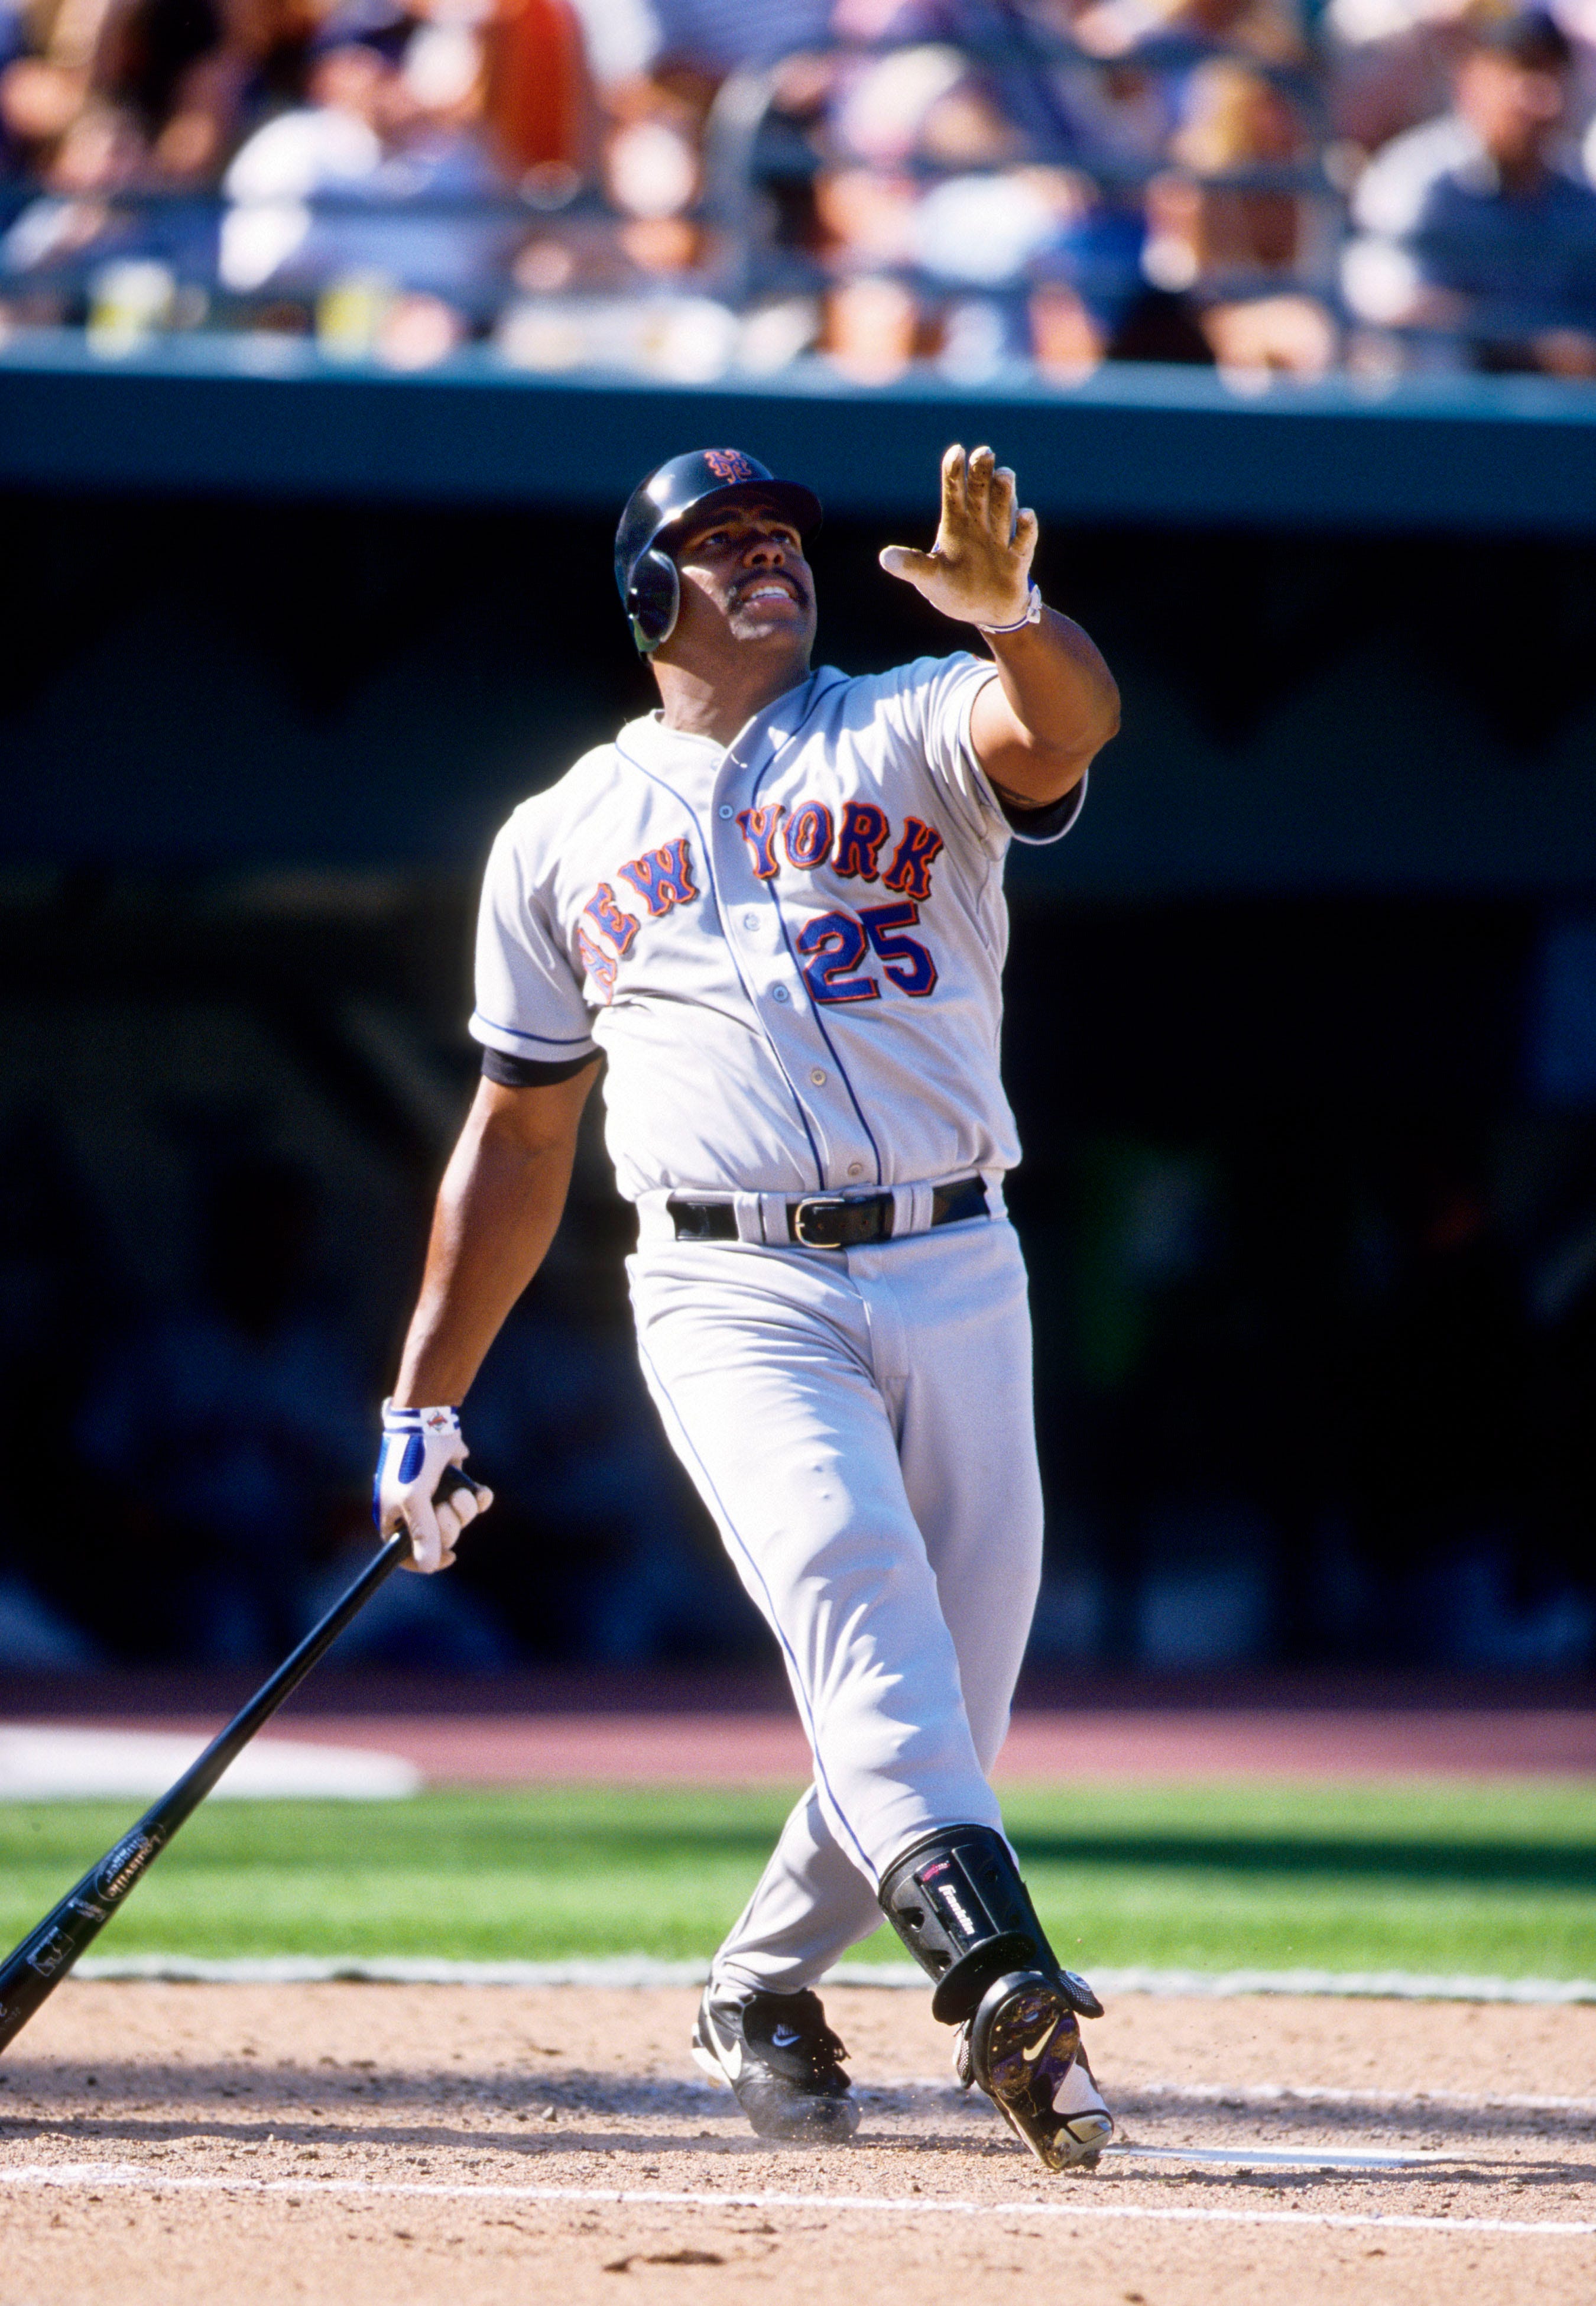 Bobby Bonilla Day' an annual reminder of one of sports' infamous